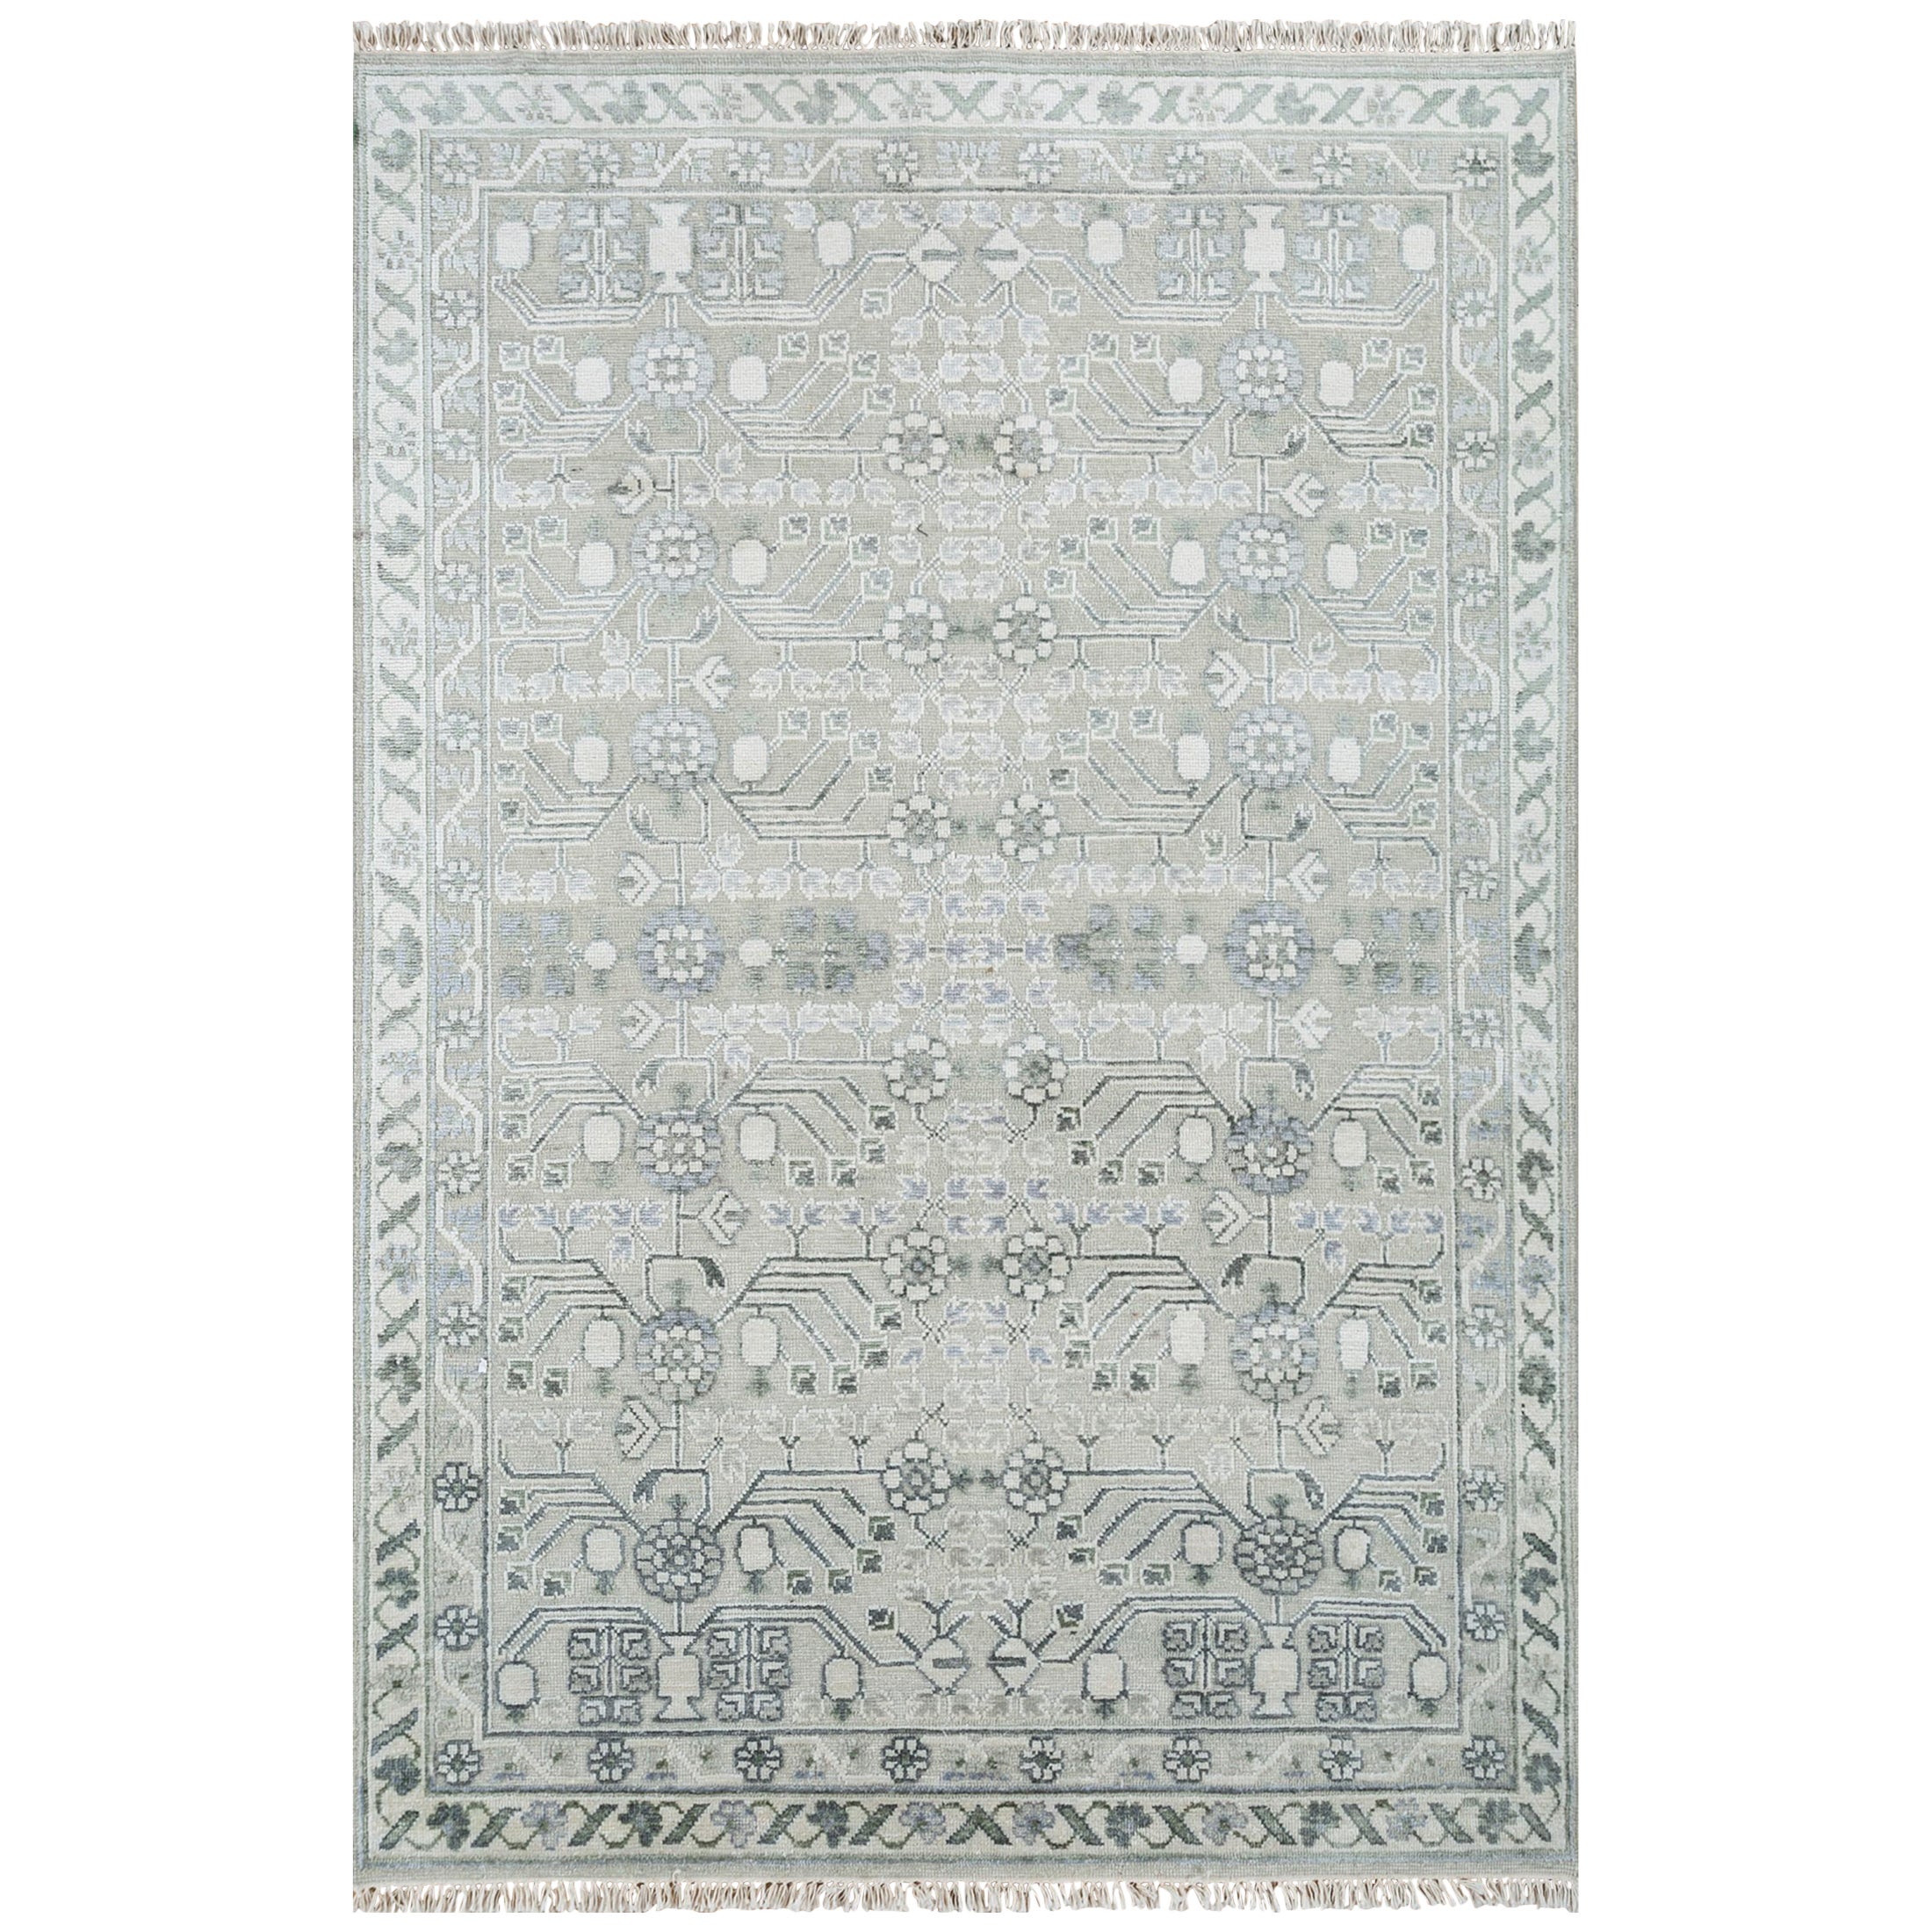 Tranquil Sky Mosaic Blue Haze Undyed White 180X270 cm Hand-Knotted Rug For Sale